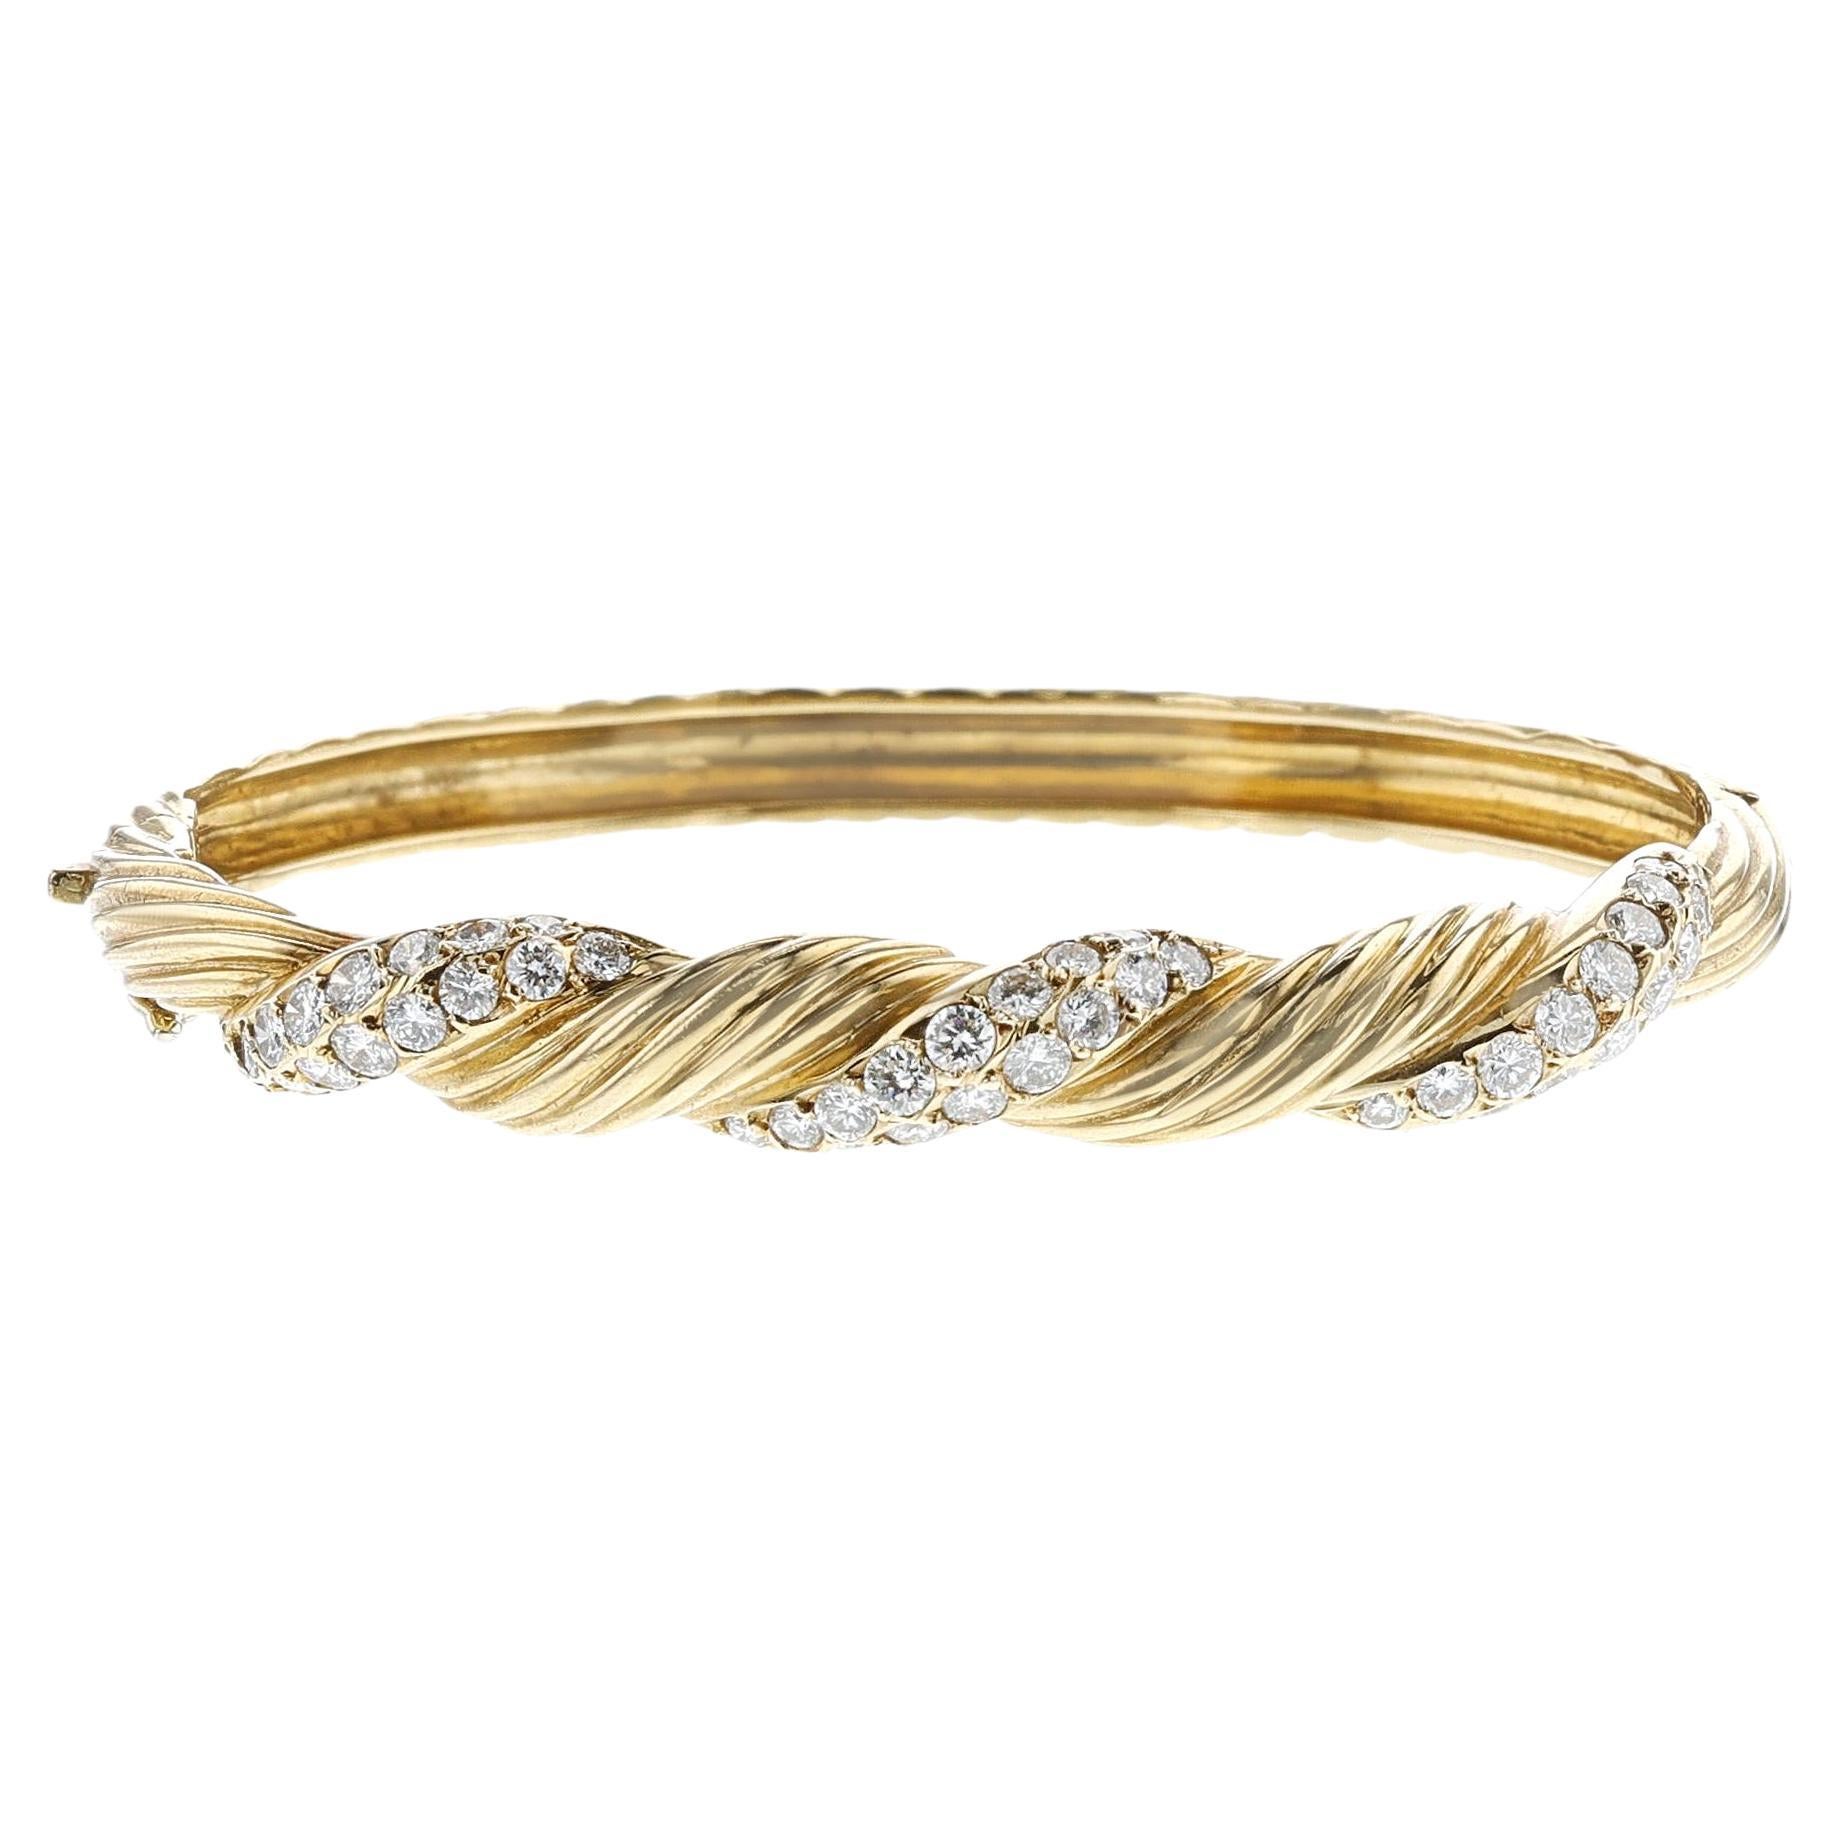 Van Cleef & Arpels Diamond and Gold Twisted Bangle, 18k